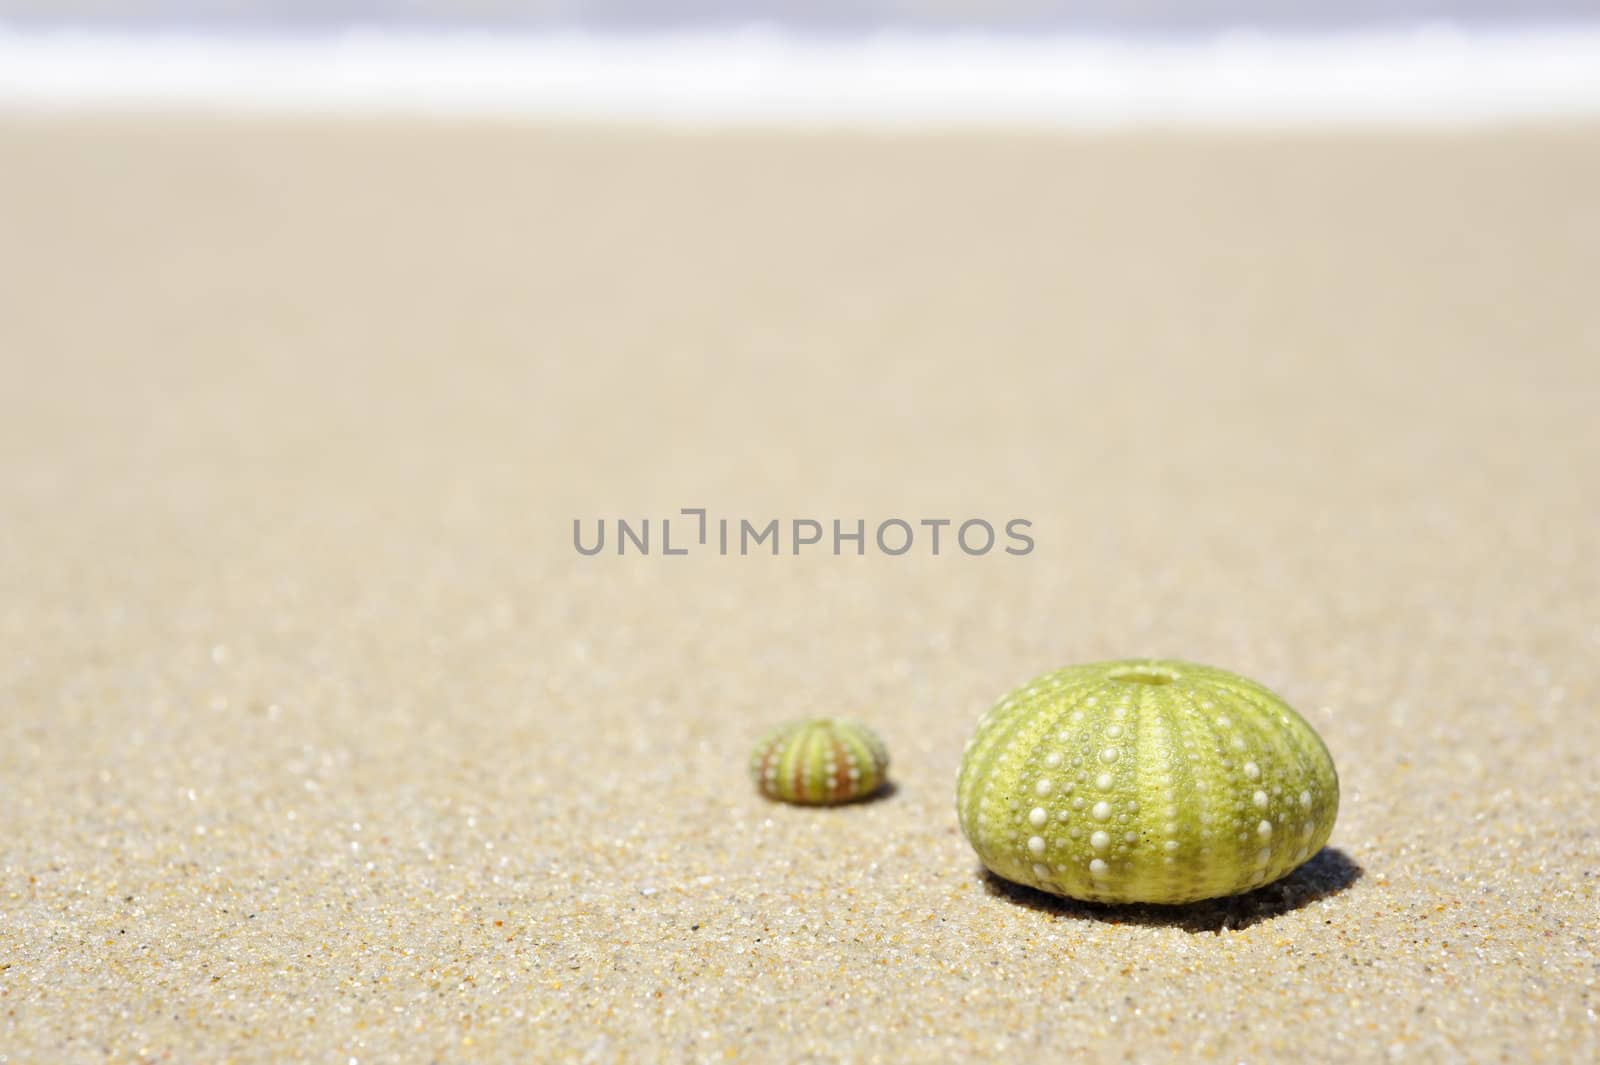 Beach scene with two dead sea urchin shells on a sunny day